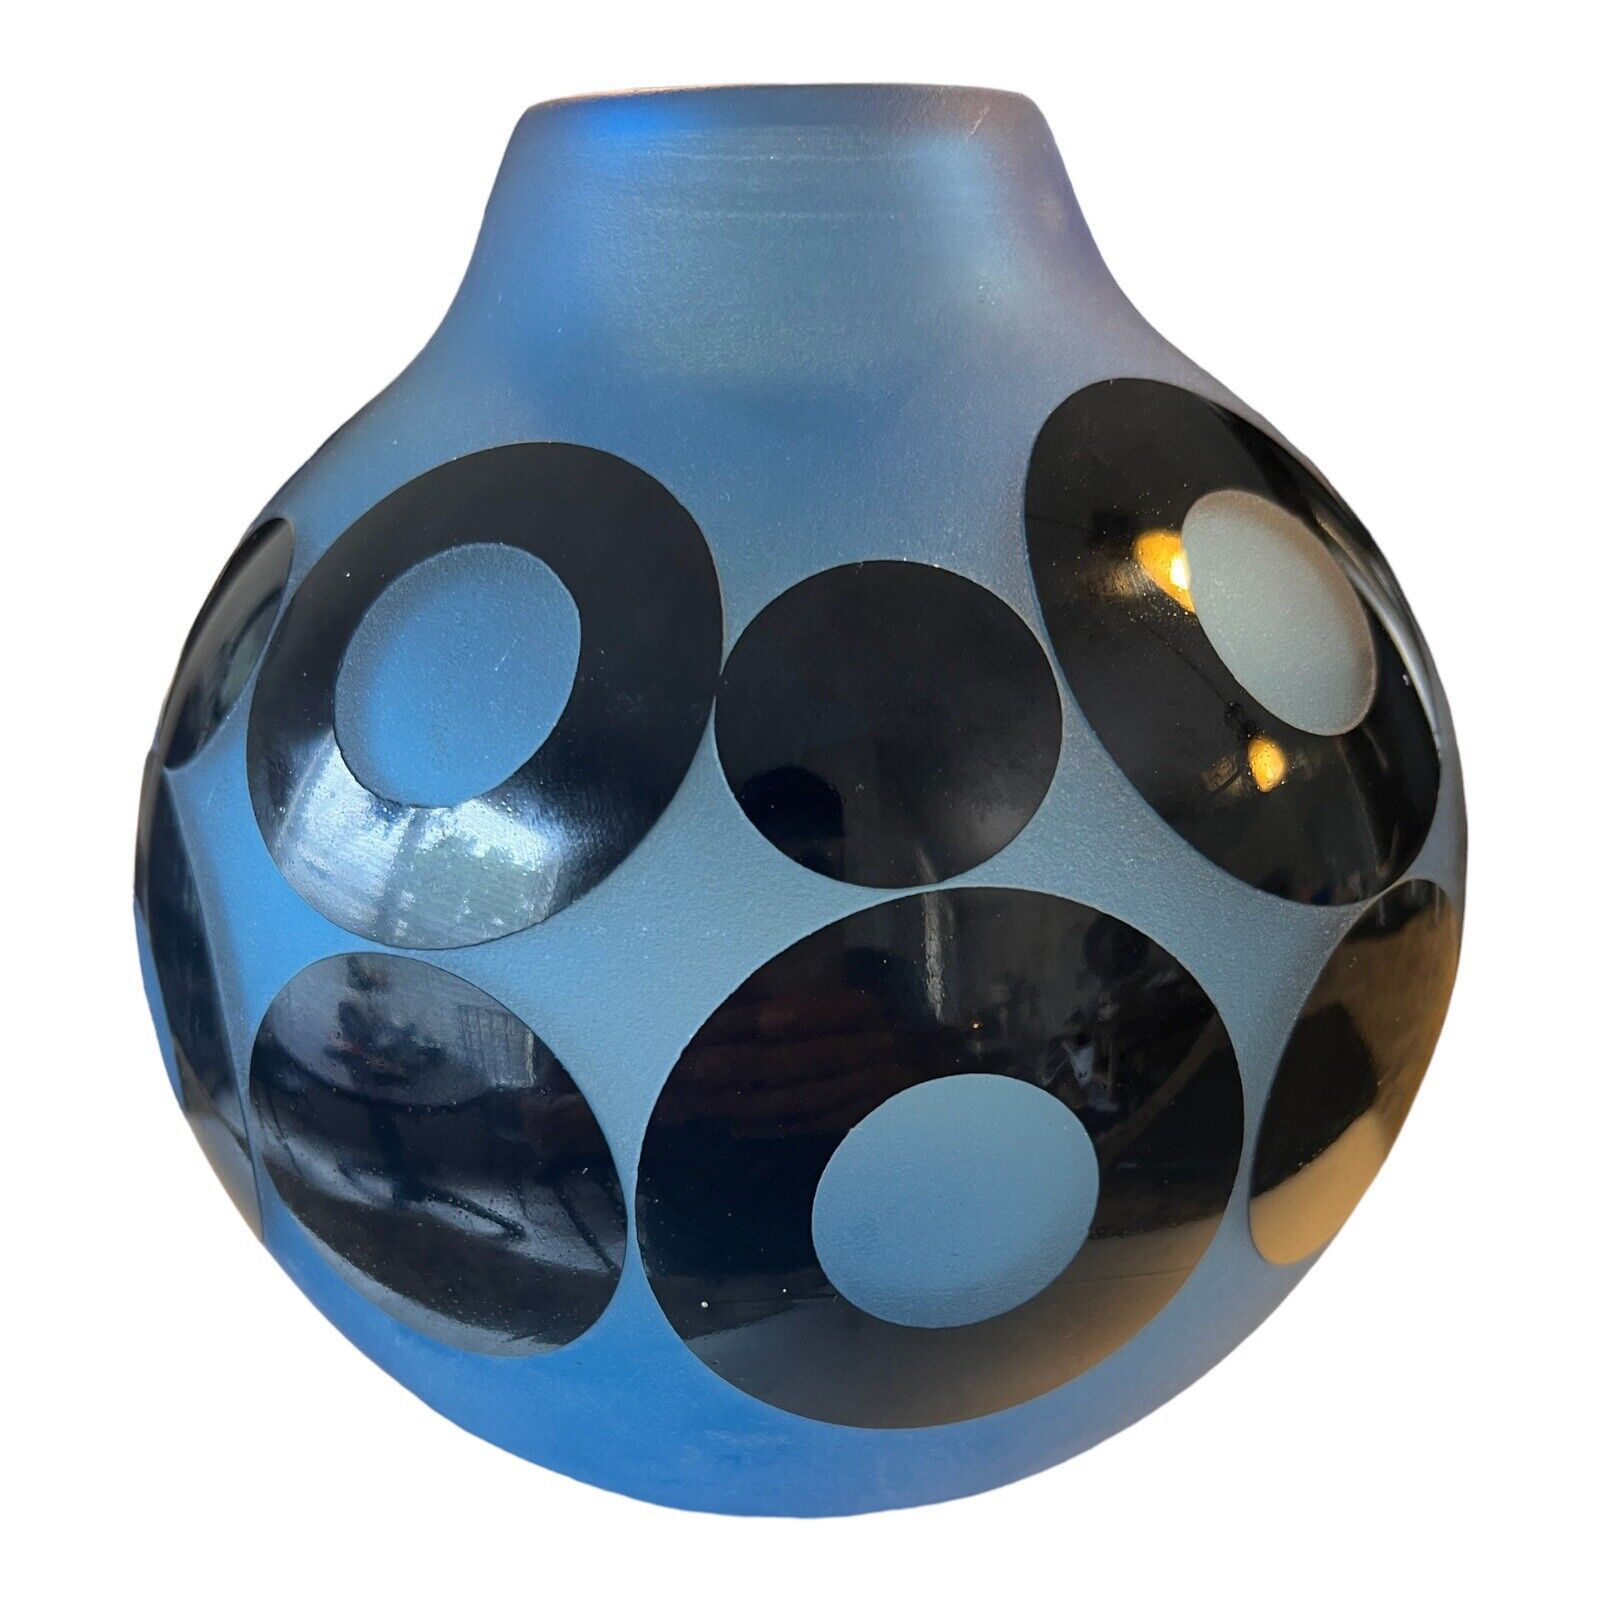 Steven Correia Limited Edition 2001 Blue With Black Circle Vase Signed And #